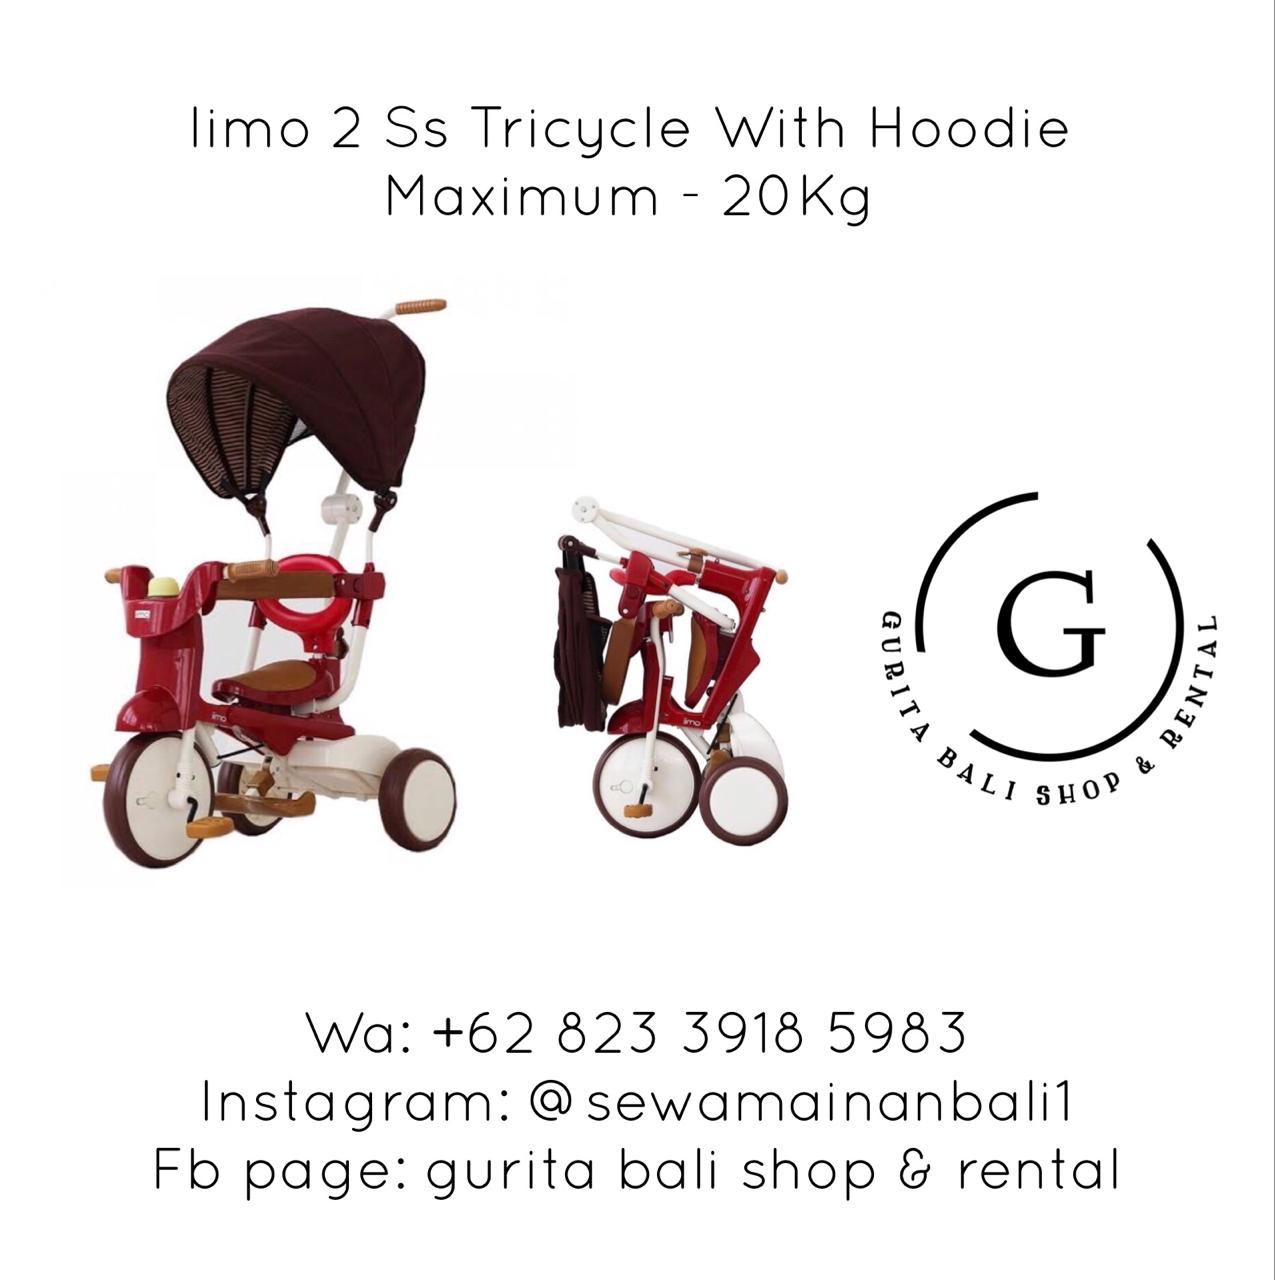 IIMO 2 SS TRICYCLE WITH HOODIE